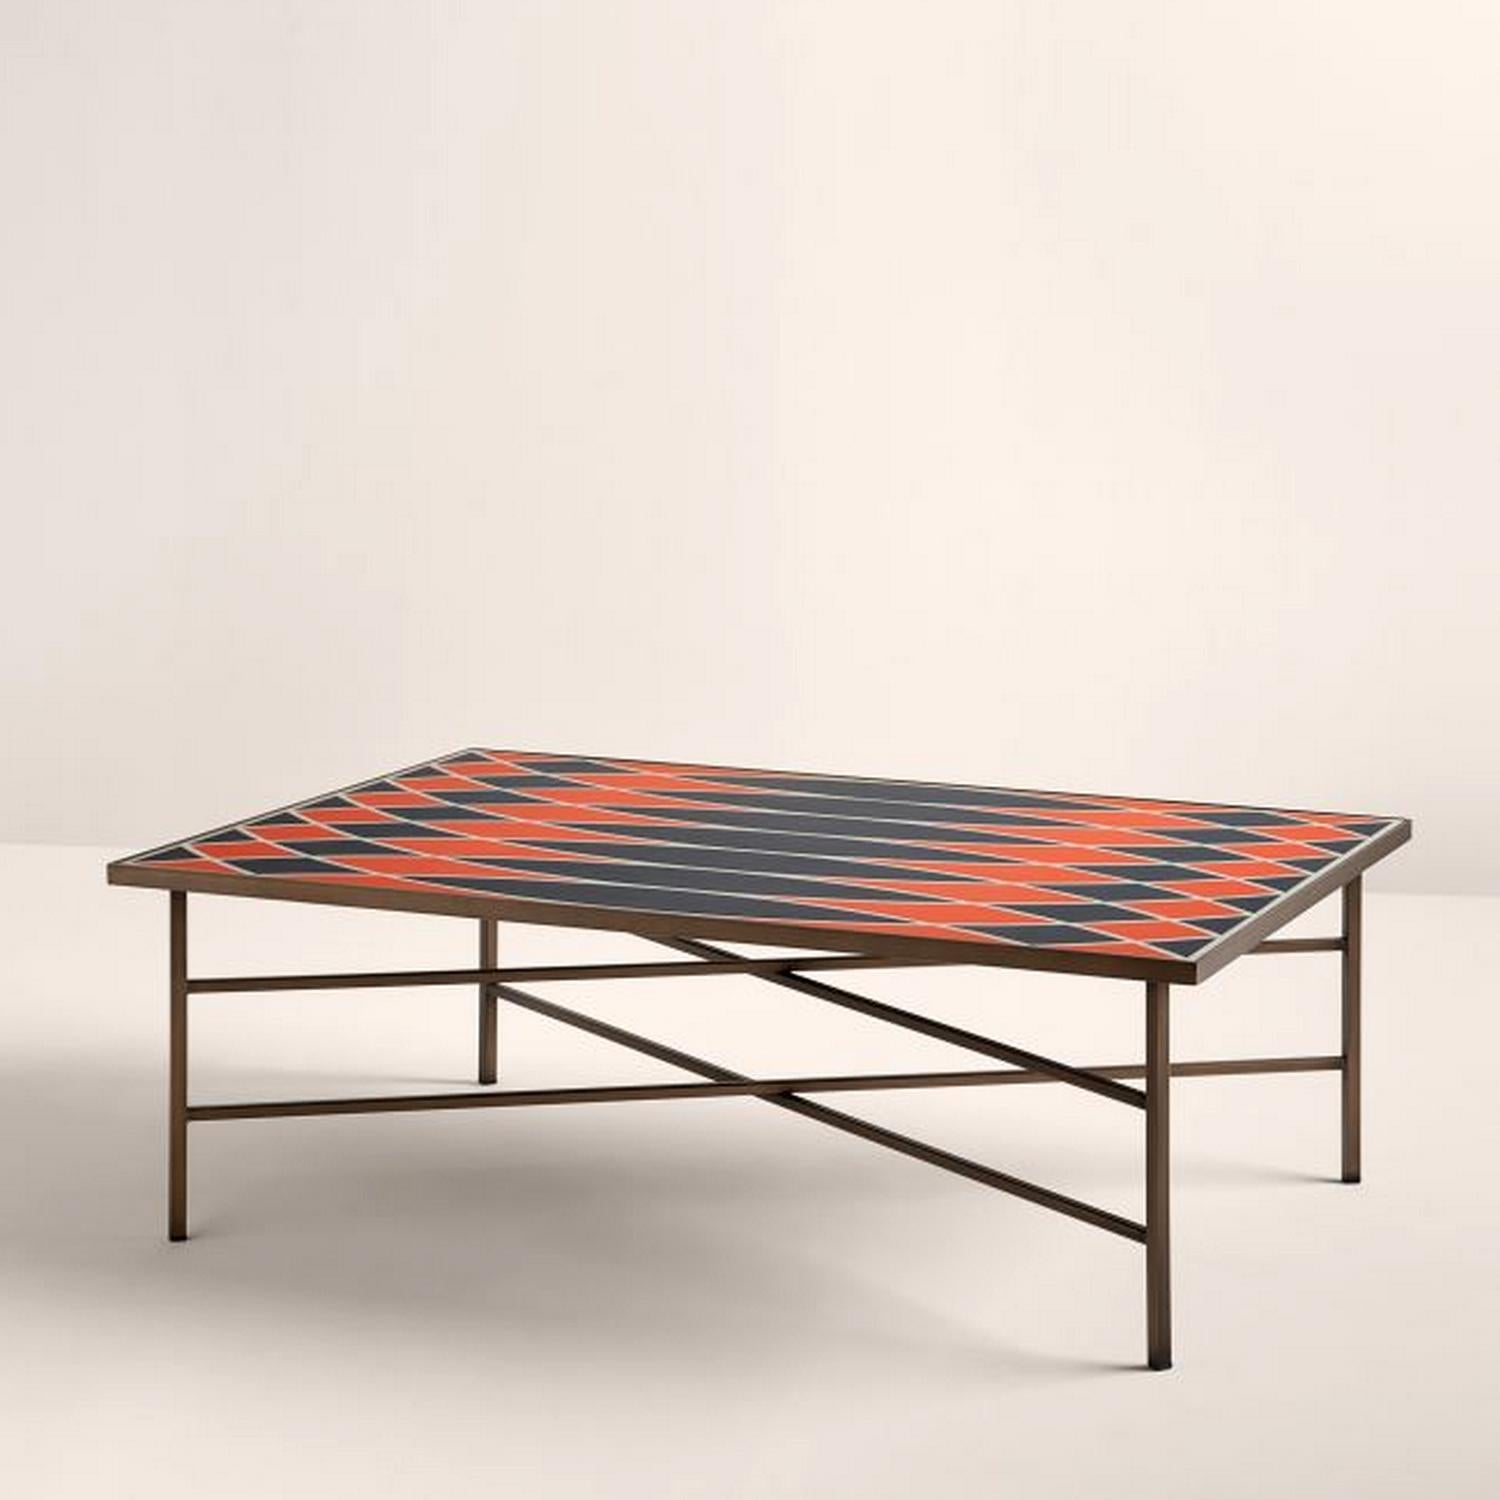 Modern In Stock in Los Angeles, Motif Coffee Table by Analogia Project, Made in Italy